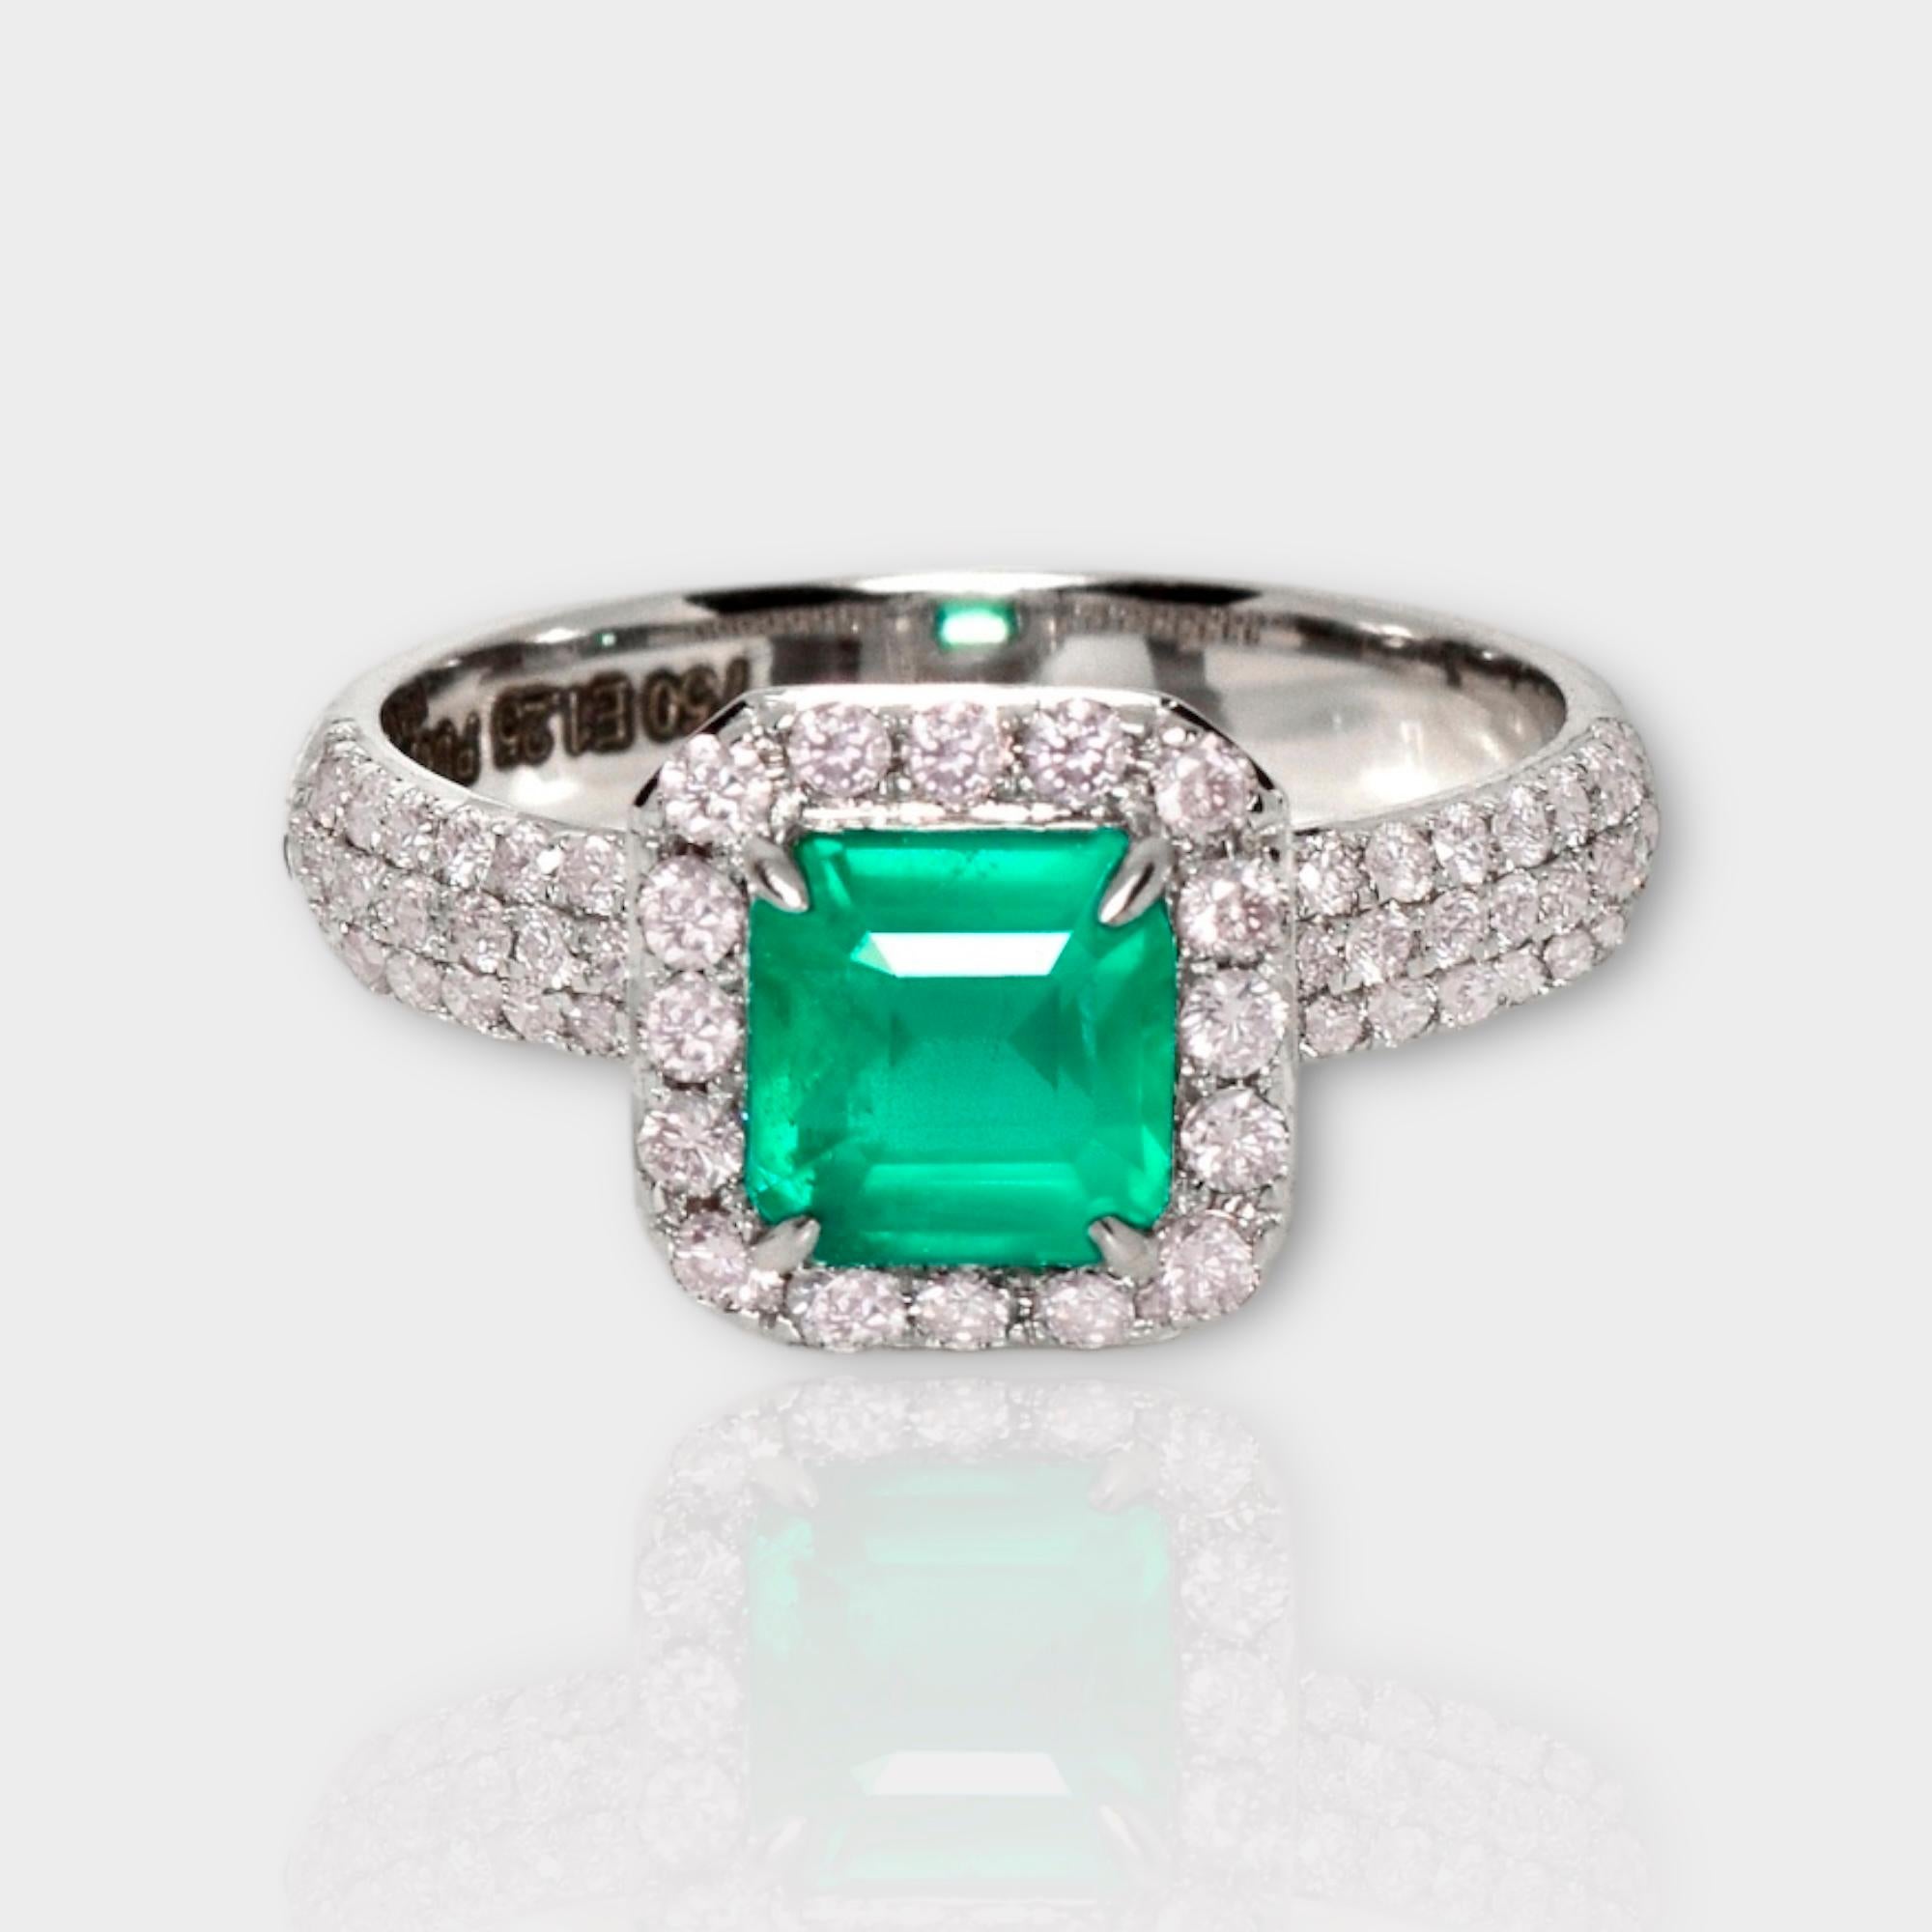 *IGI 18K 1.25 ct Natural Green Emerald&Pink Diamond Art Deco Engagement Ring*
IGI-certified natural Zambia green emerald weighing 1.25 ct set on the 18K white gold arc deco design band with natural pink diamonds weighing 0.60 ct. 

The good-quality